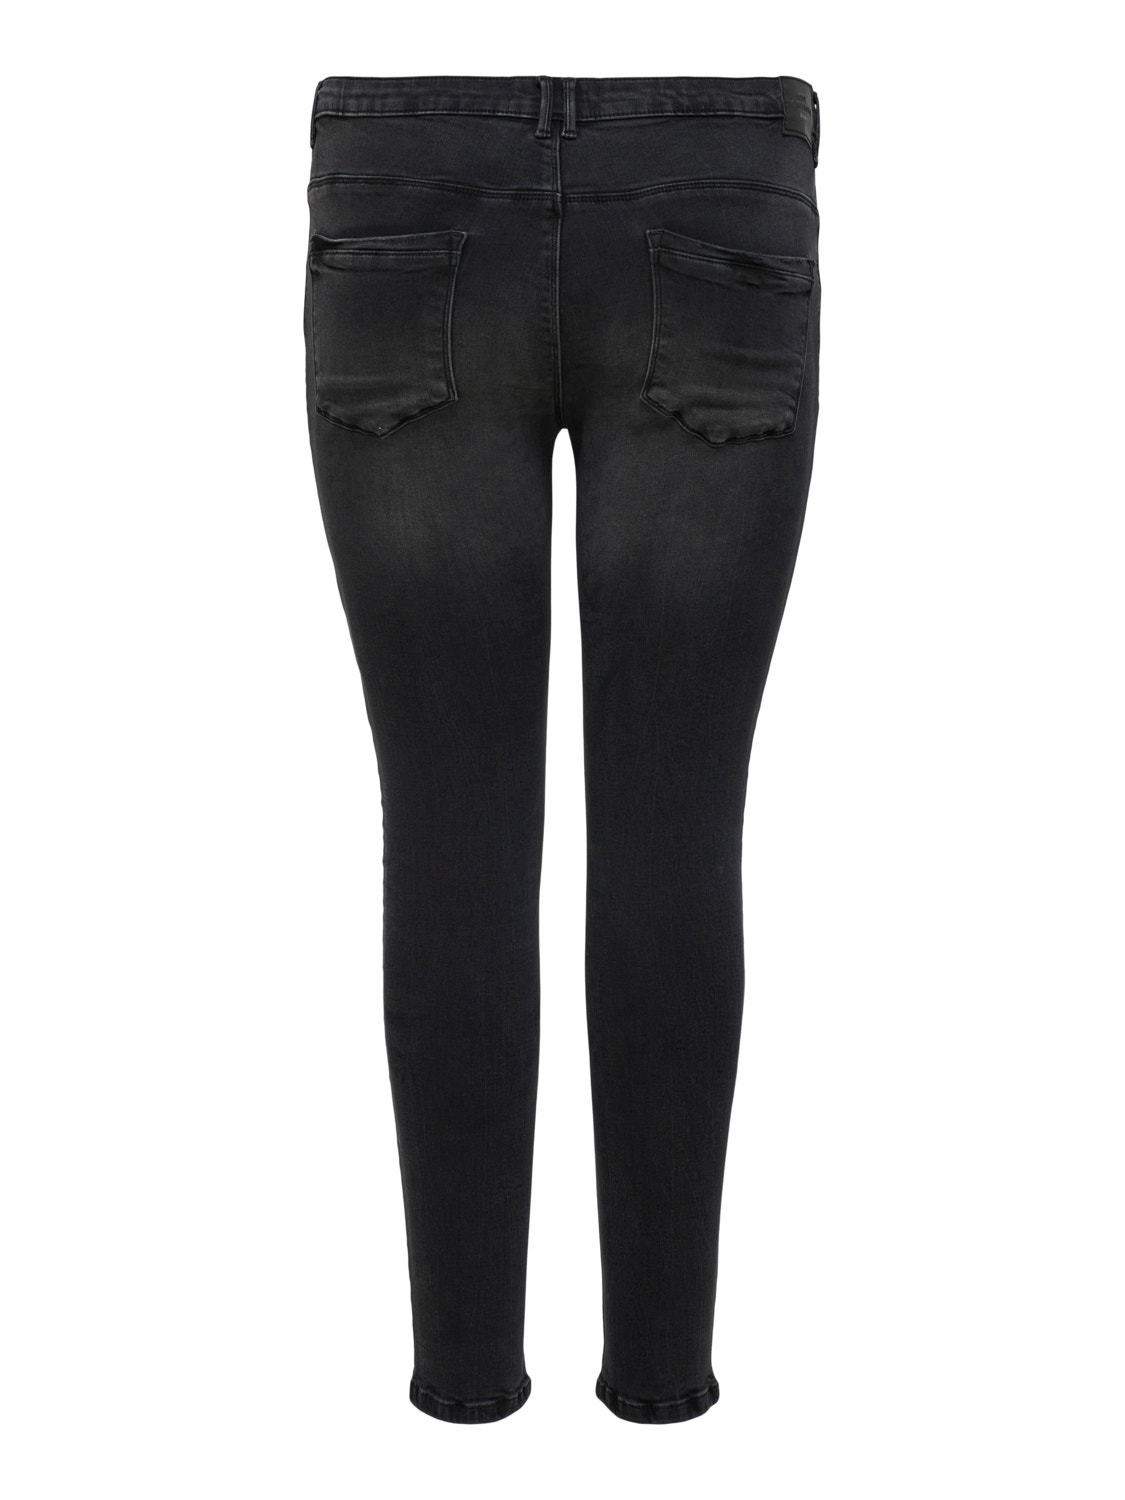 ONLY Jeans Skinny Fit Taille moyenne Ourlé destroy -Black - 15250684